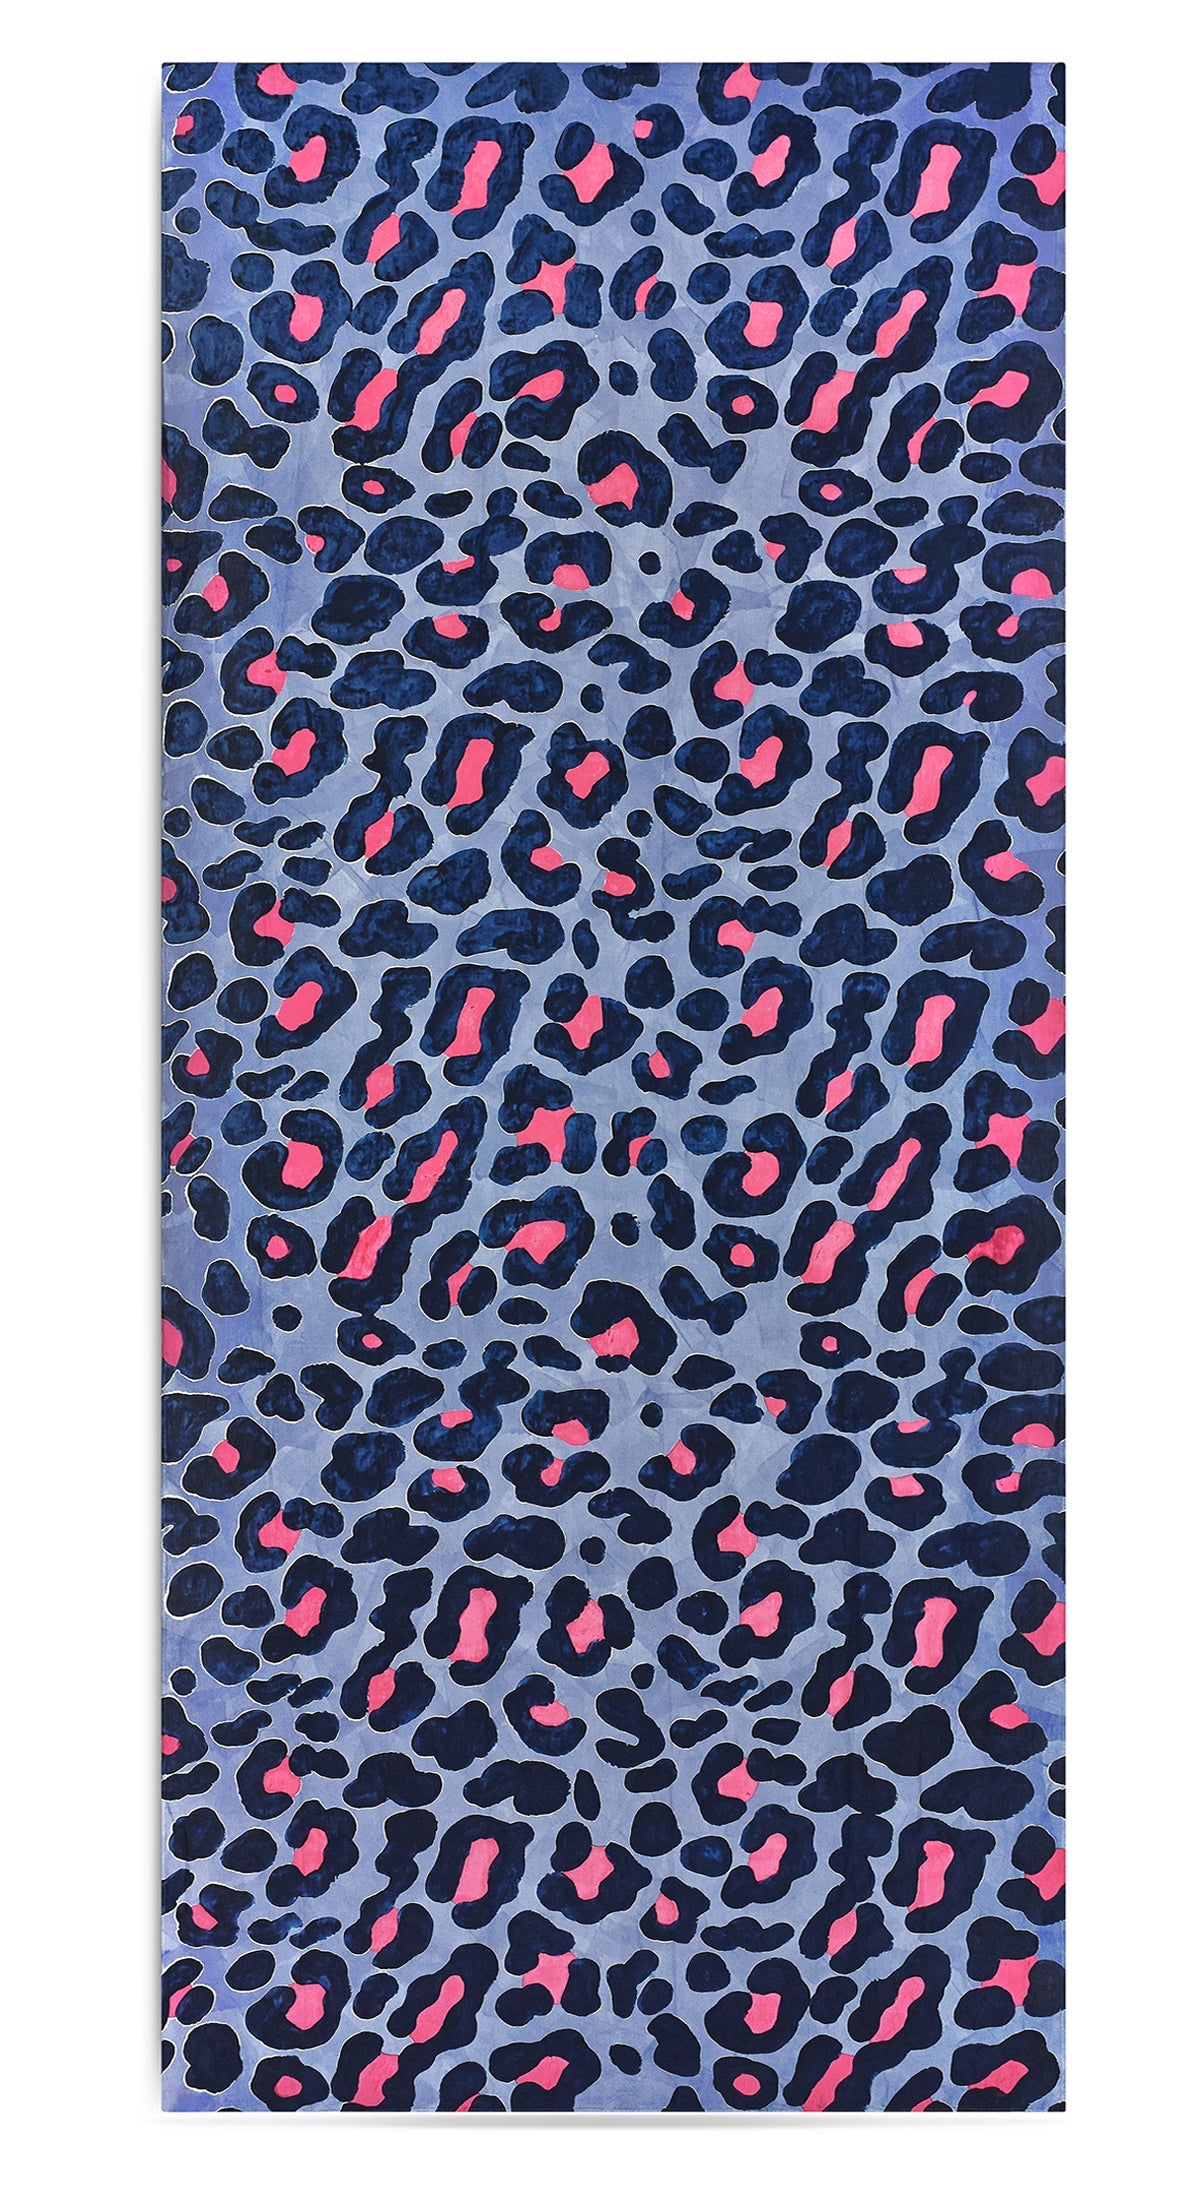 Fierce Leopard Linen Tablecloth in Powder Blue with Fuchsia Pink And Ink Blue Spots